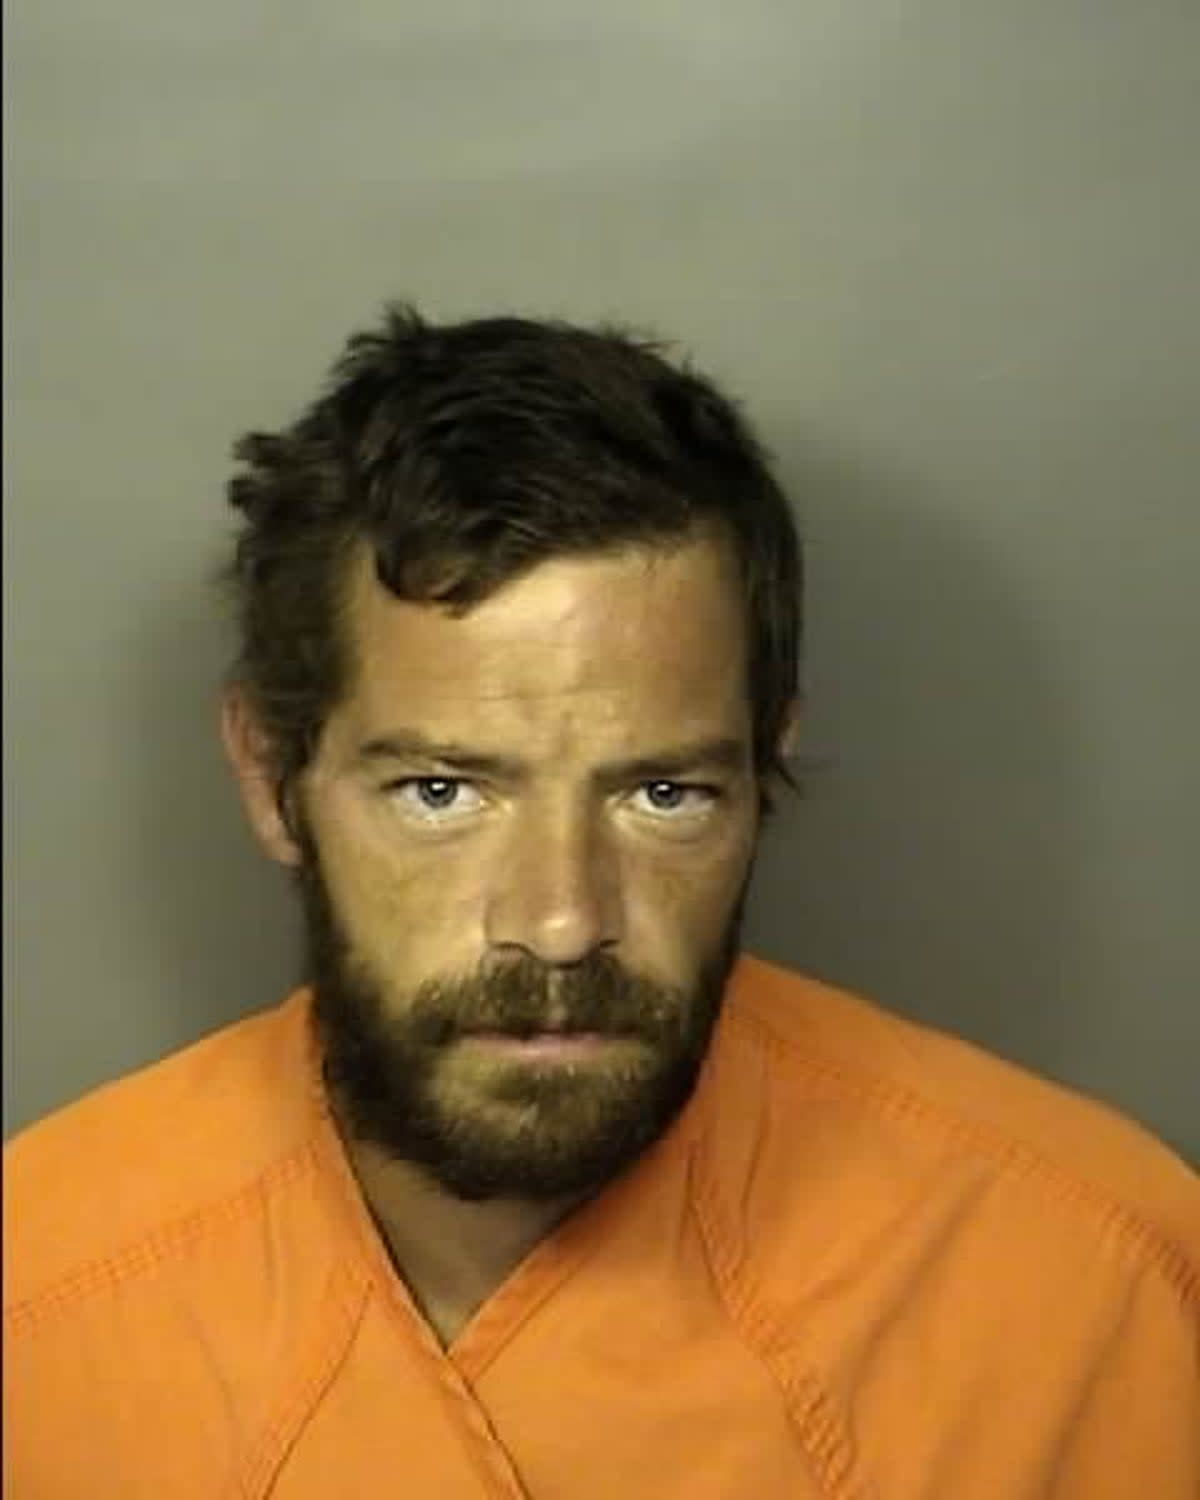 Peter Michael Anthony Tighe, 36, has been arrested after cops say he almost cut off a man’s nose for kissing his relative (Horry County Sheriff’s Office)